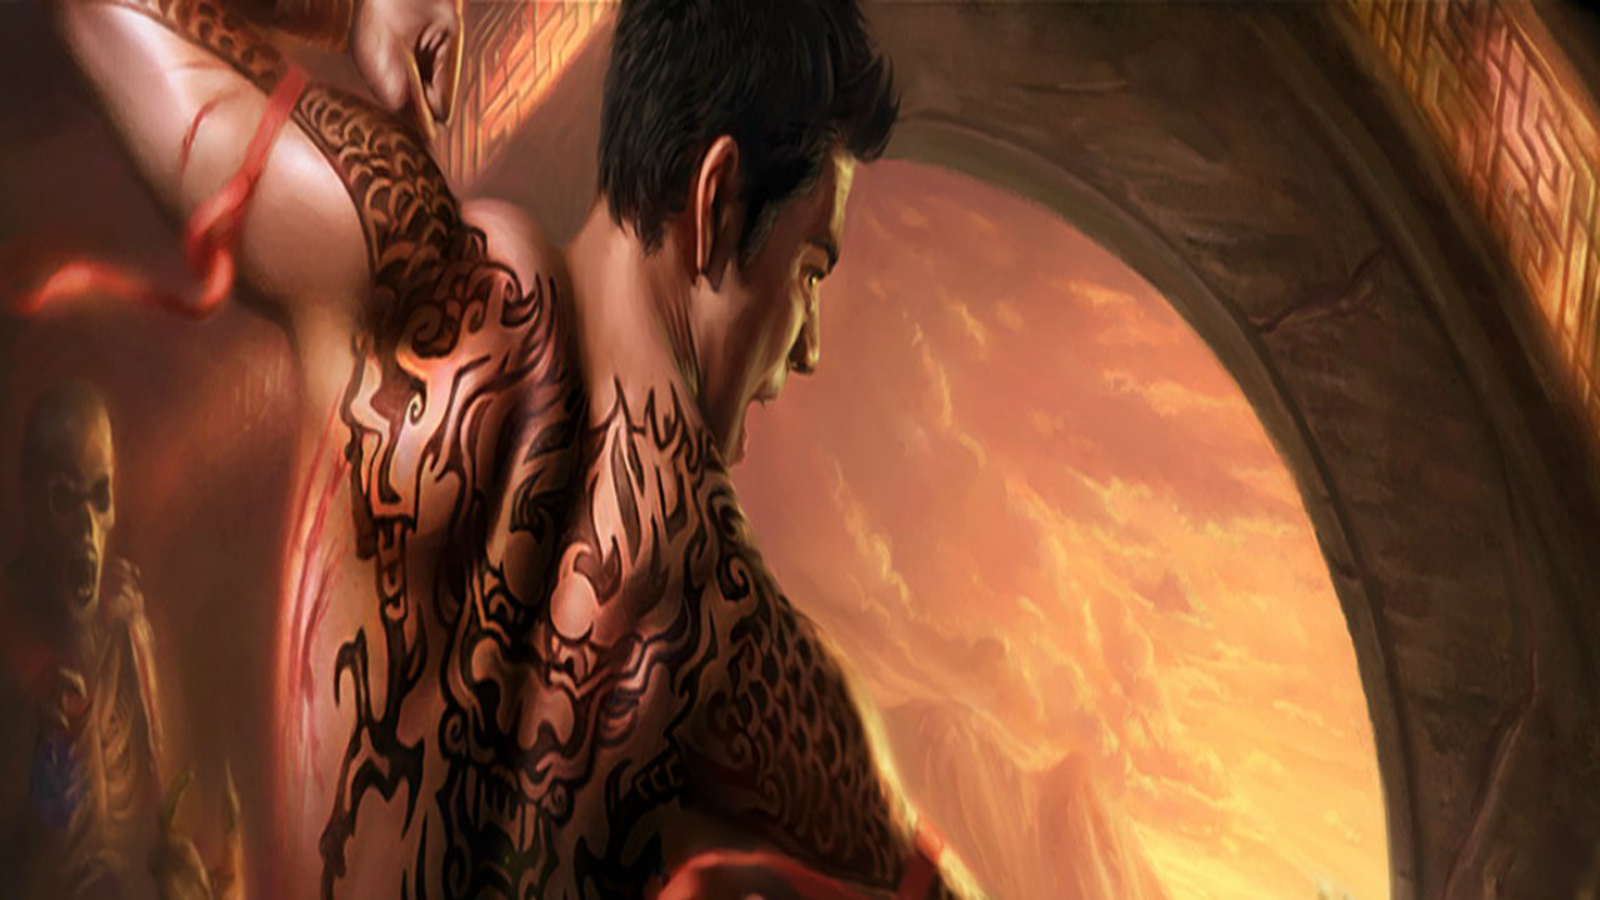 Dragon Age browser RPG revealed, Jade Empire sequel in limbo - GameSpot